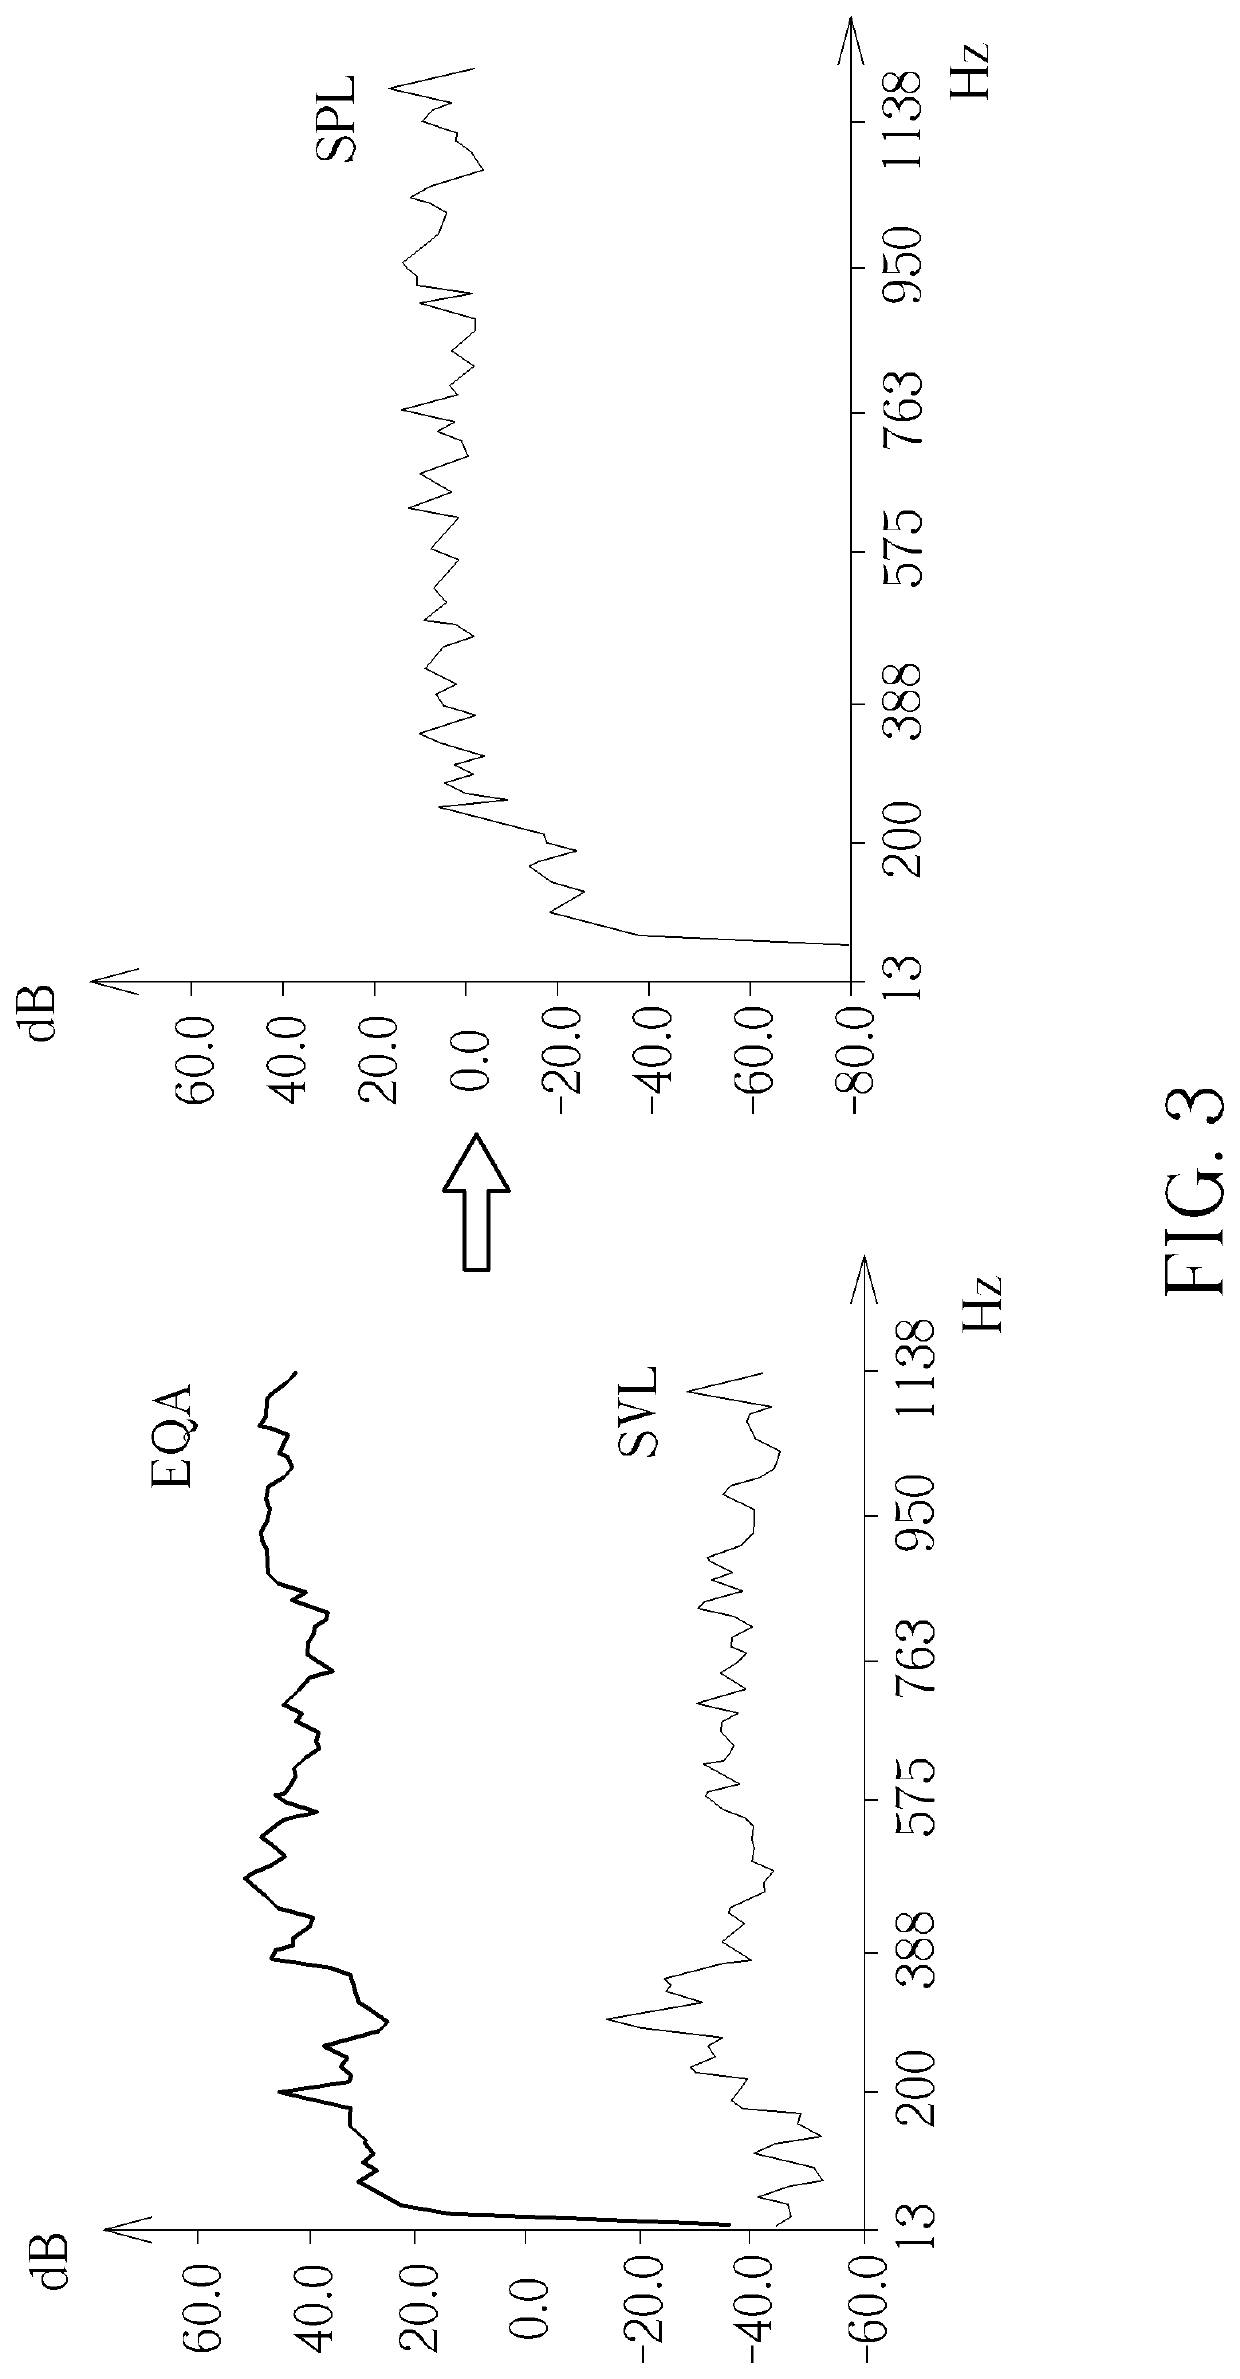 Acoustic noise detection method and system using vibration sensor to detect acoustic noise